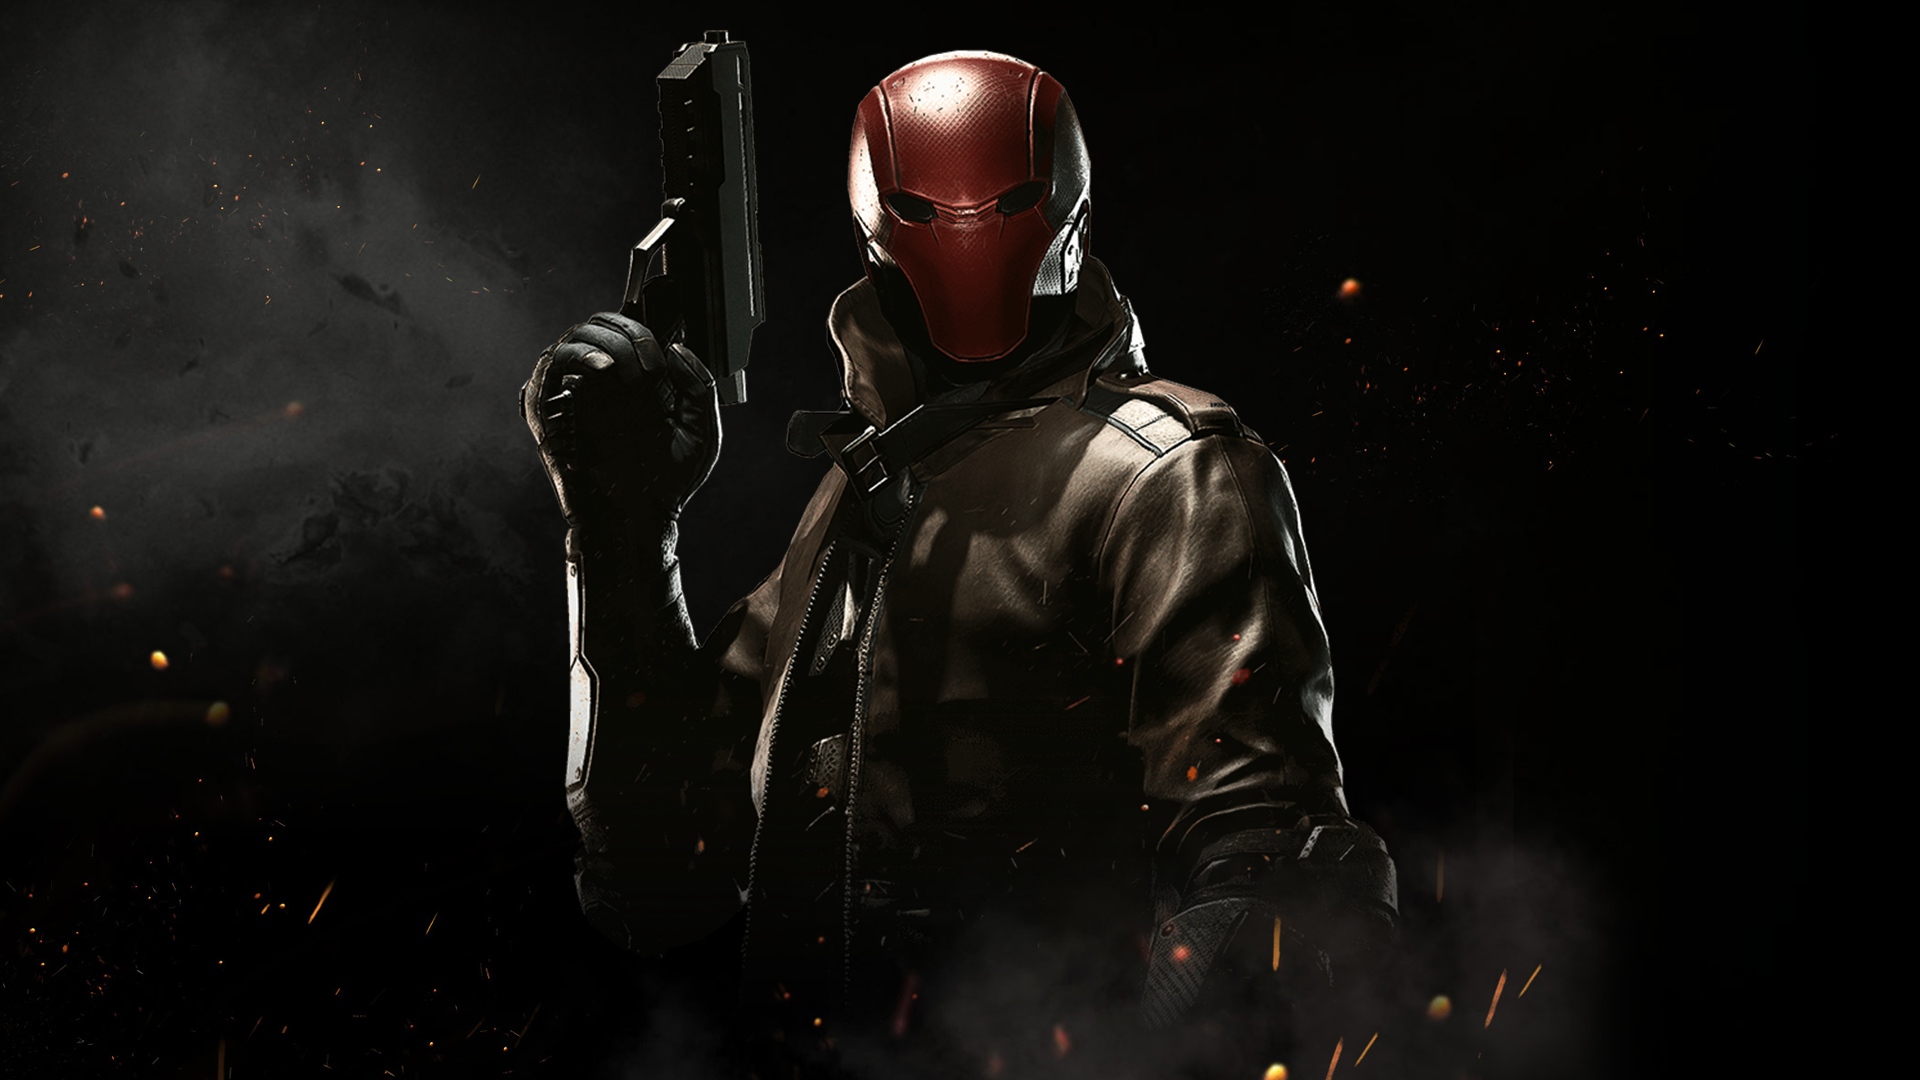 injustice 2, jason todd, video game, red hood, injustice